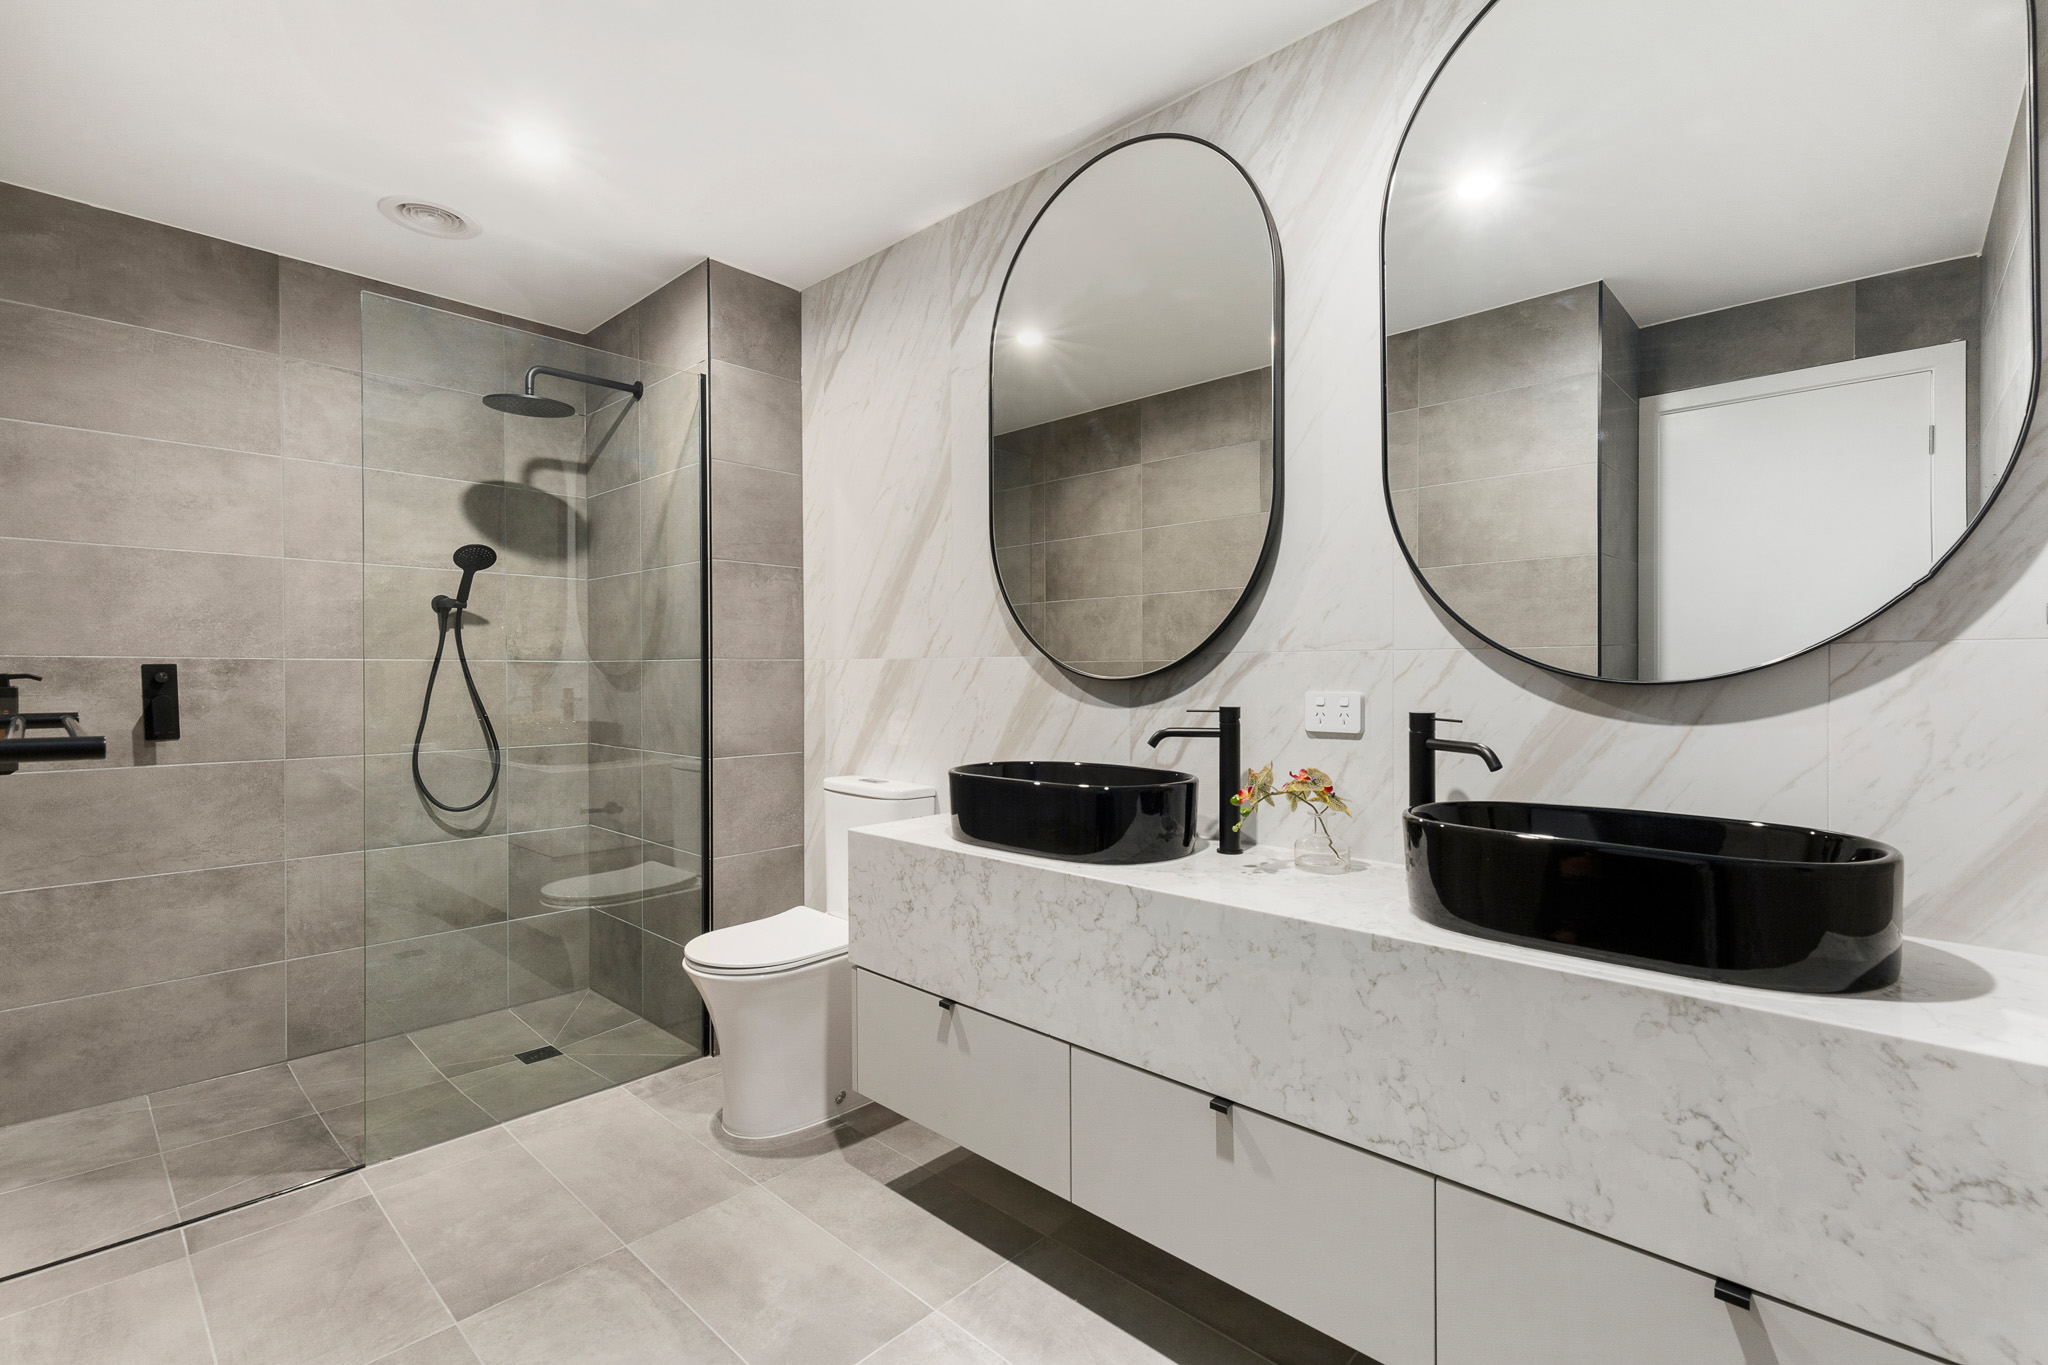 Bathroom - Two Bedroom Townhouse - Urban Rest Fitzroy North - Melbourne